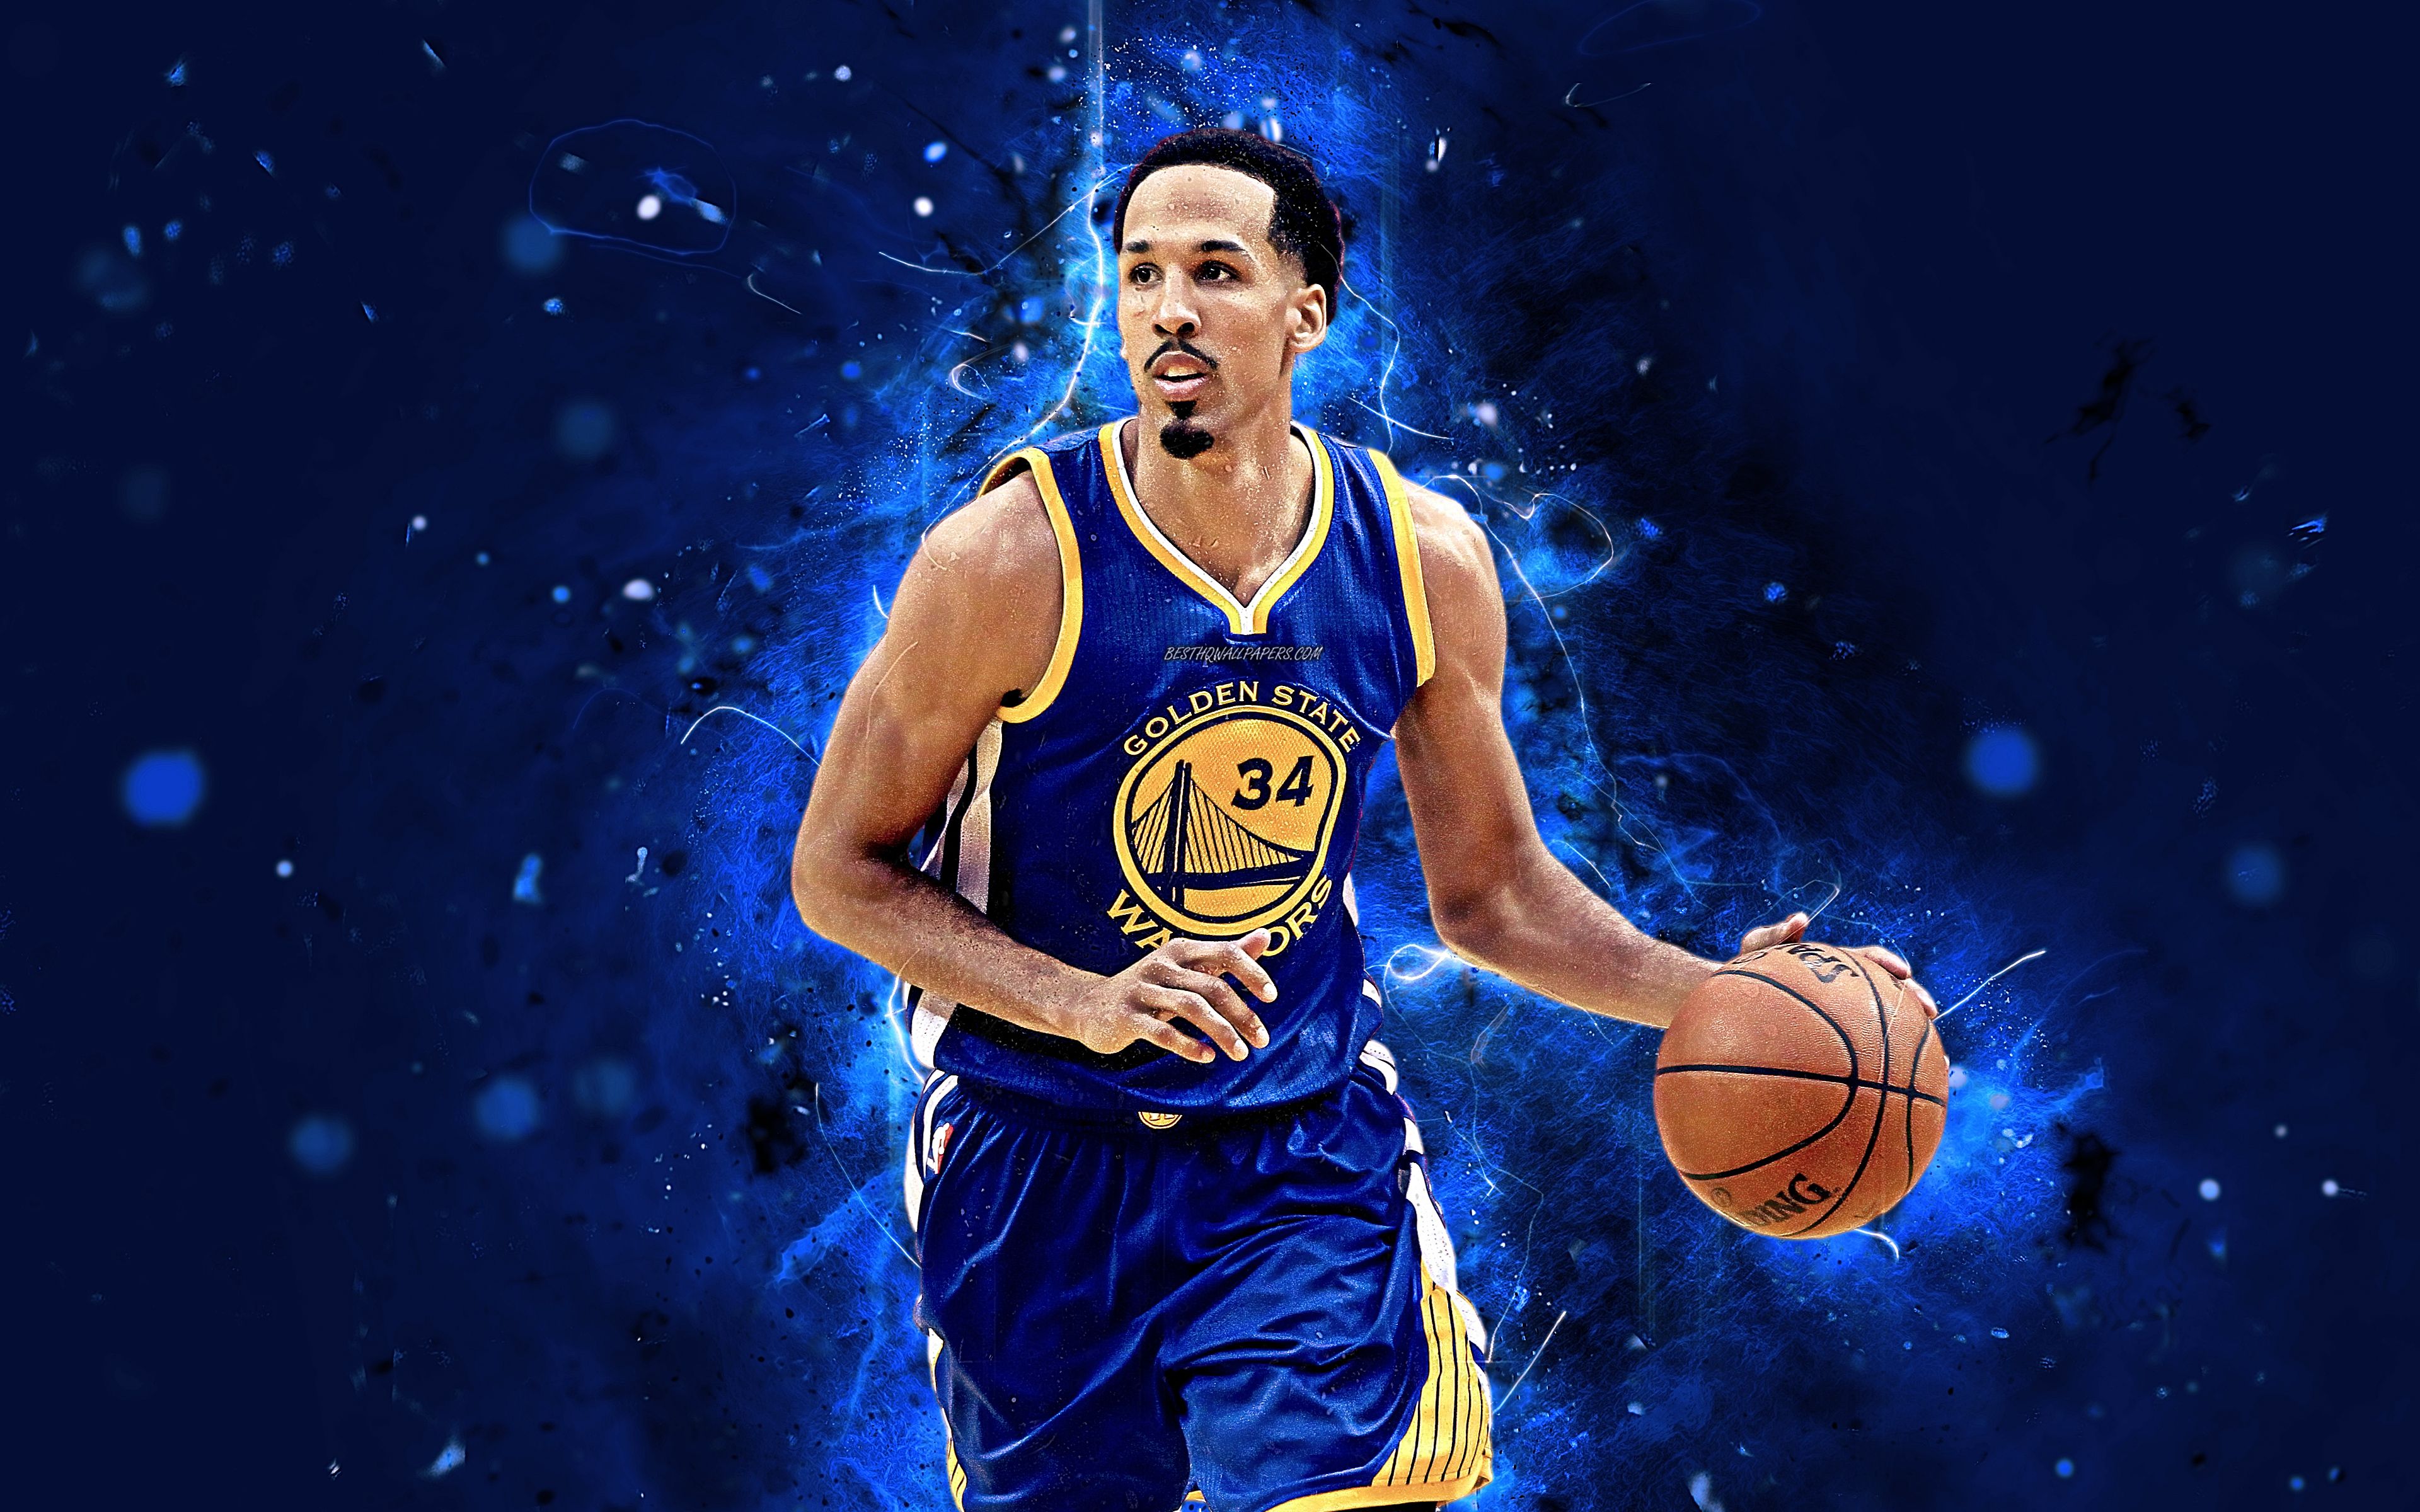 Download wallpaper 4k, Shaun Livingston, abstract art, basketball stars, NBA, Golden State Warriors, Livingston, basketball, neon lights, creative for desktop with resolution 3840x2400. High Quality HD picture wallpaper